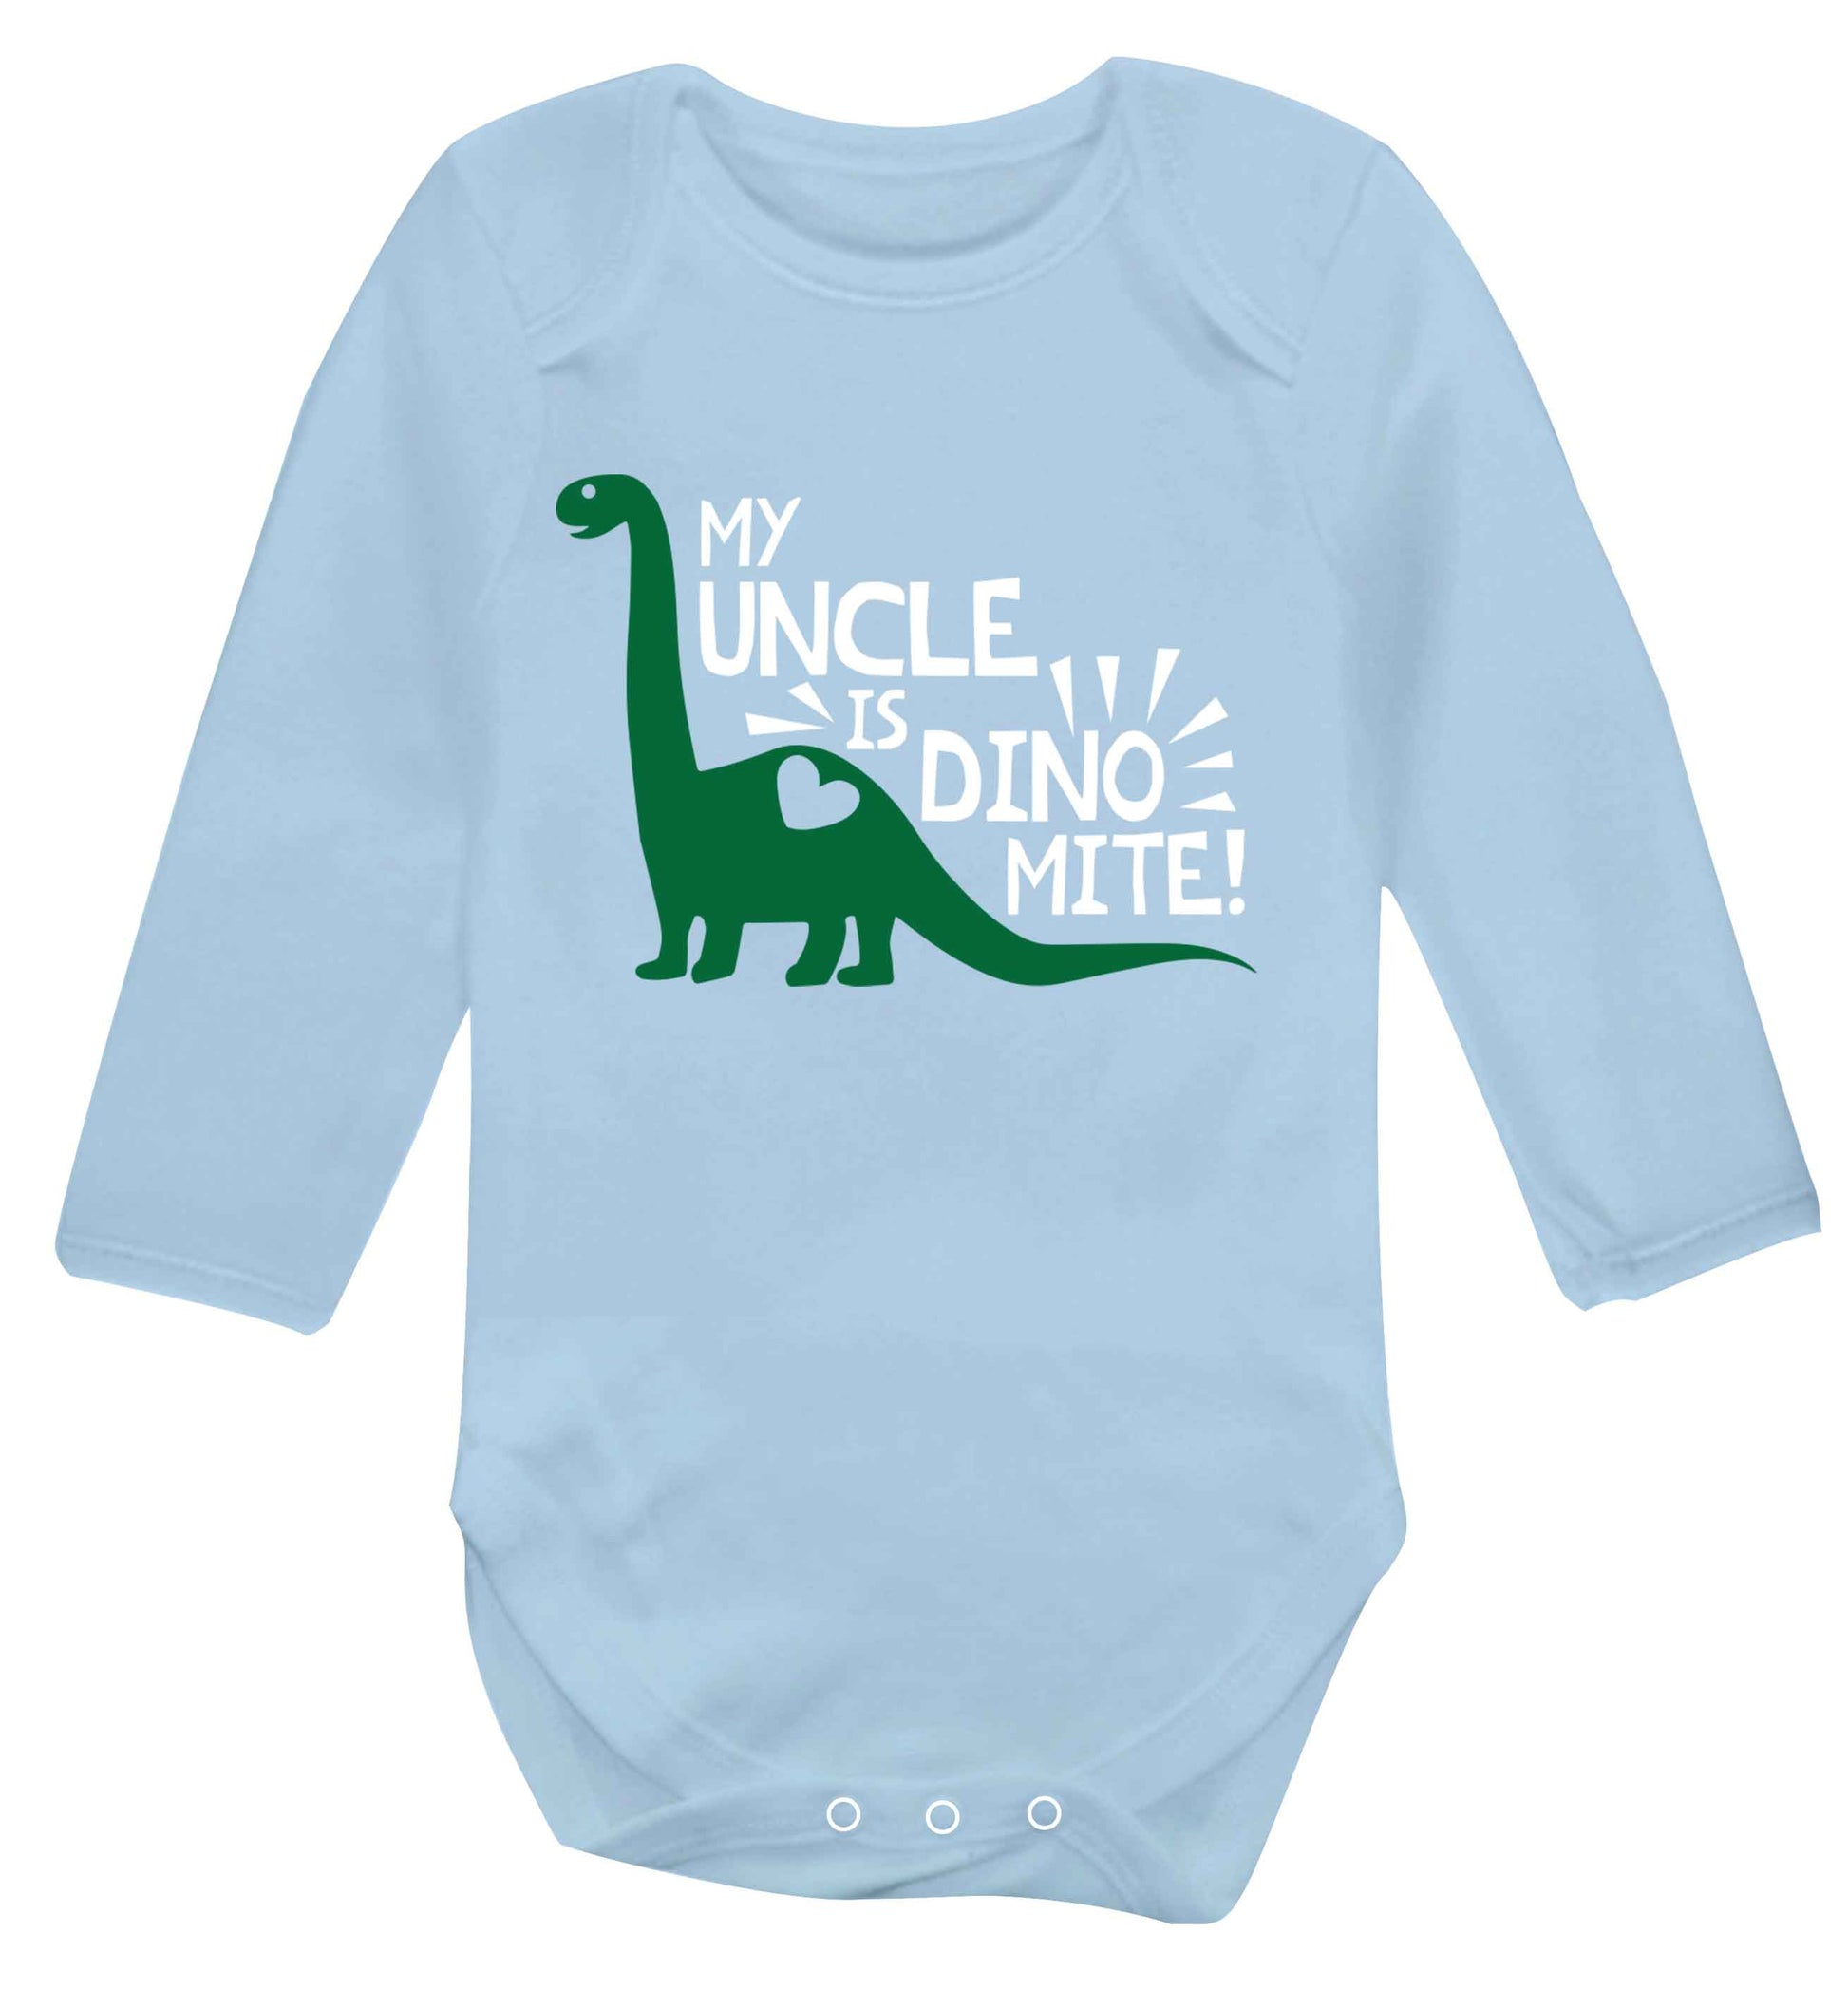 My uncle is dinomite! Baby Vest long sleeved pale blue 6-12 months